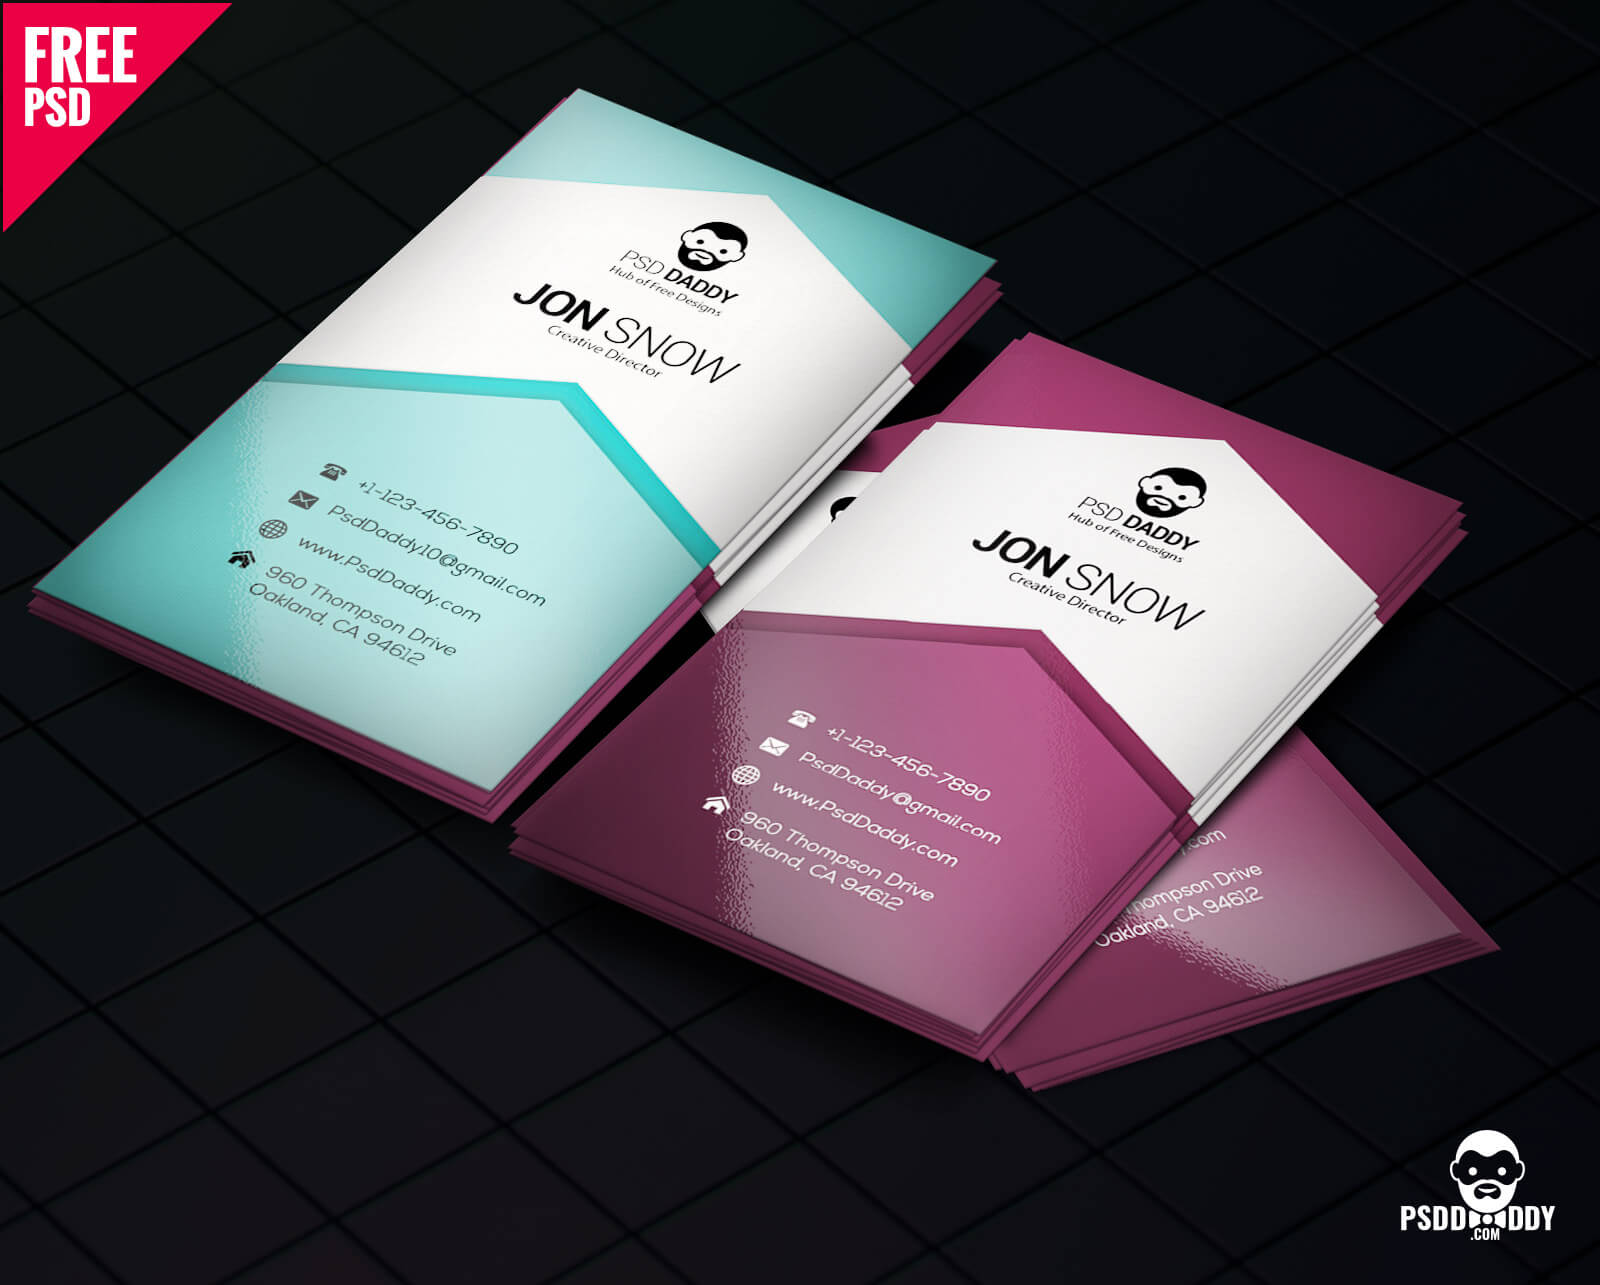 Download]Creative Business Card Psd Free | Psddaddy Pertaining To Visiting Card Templates Psd Free Download